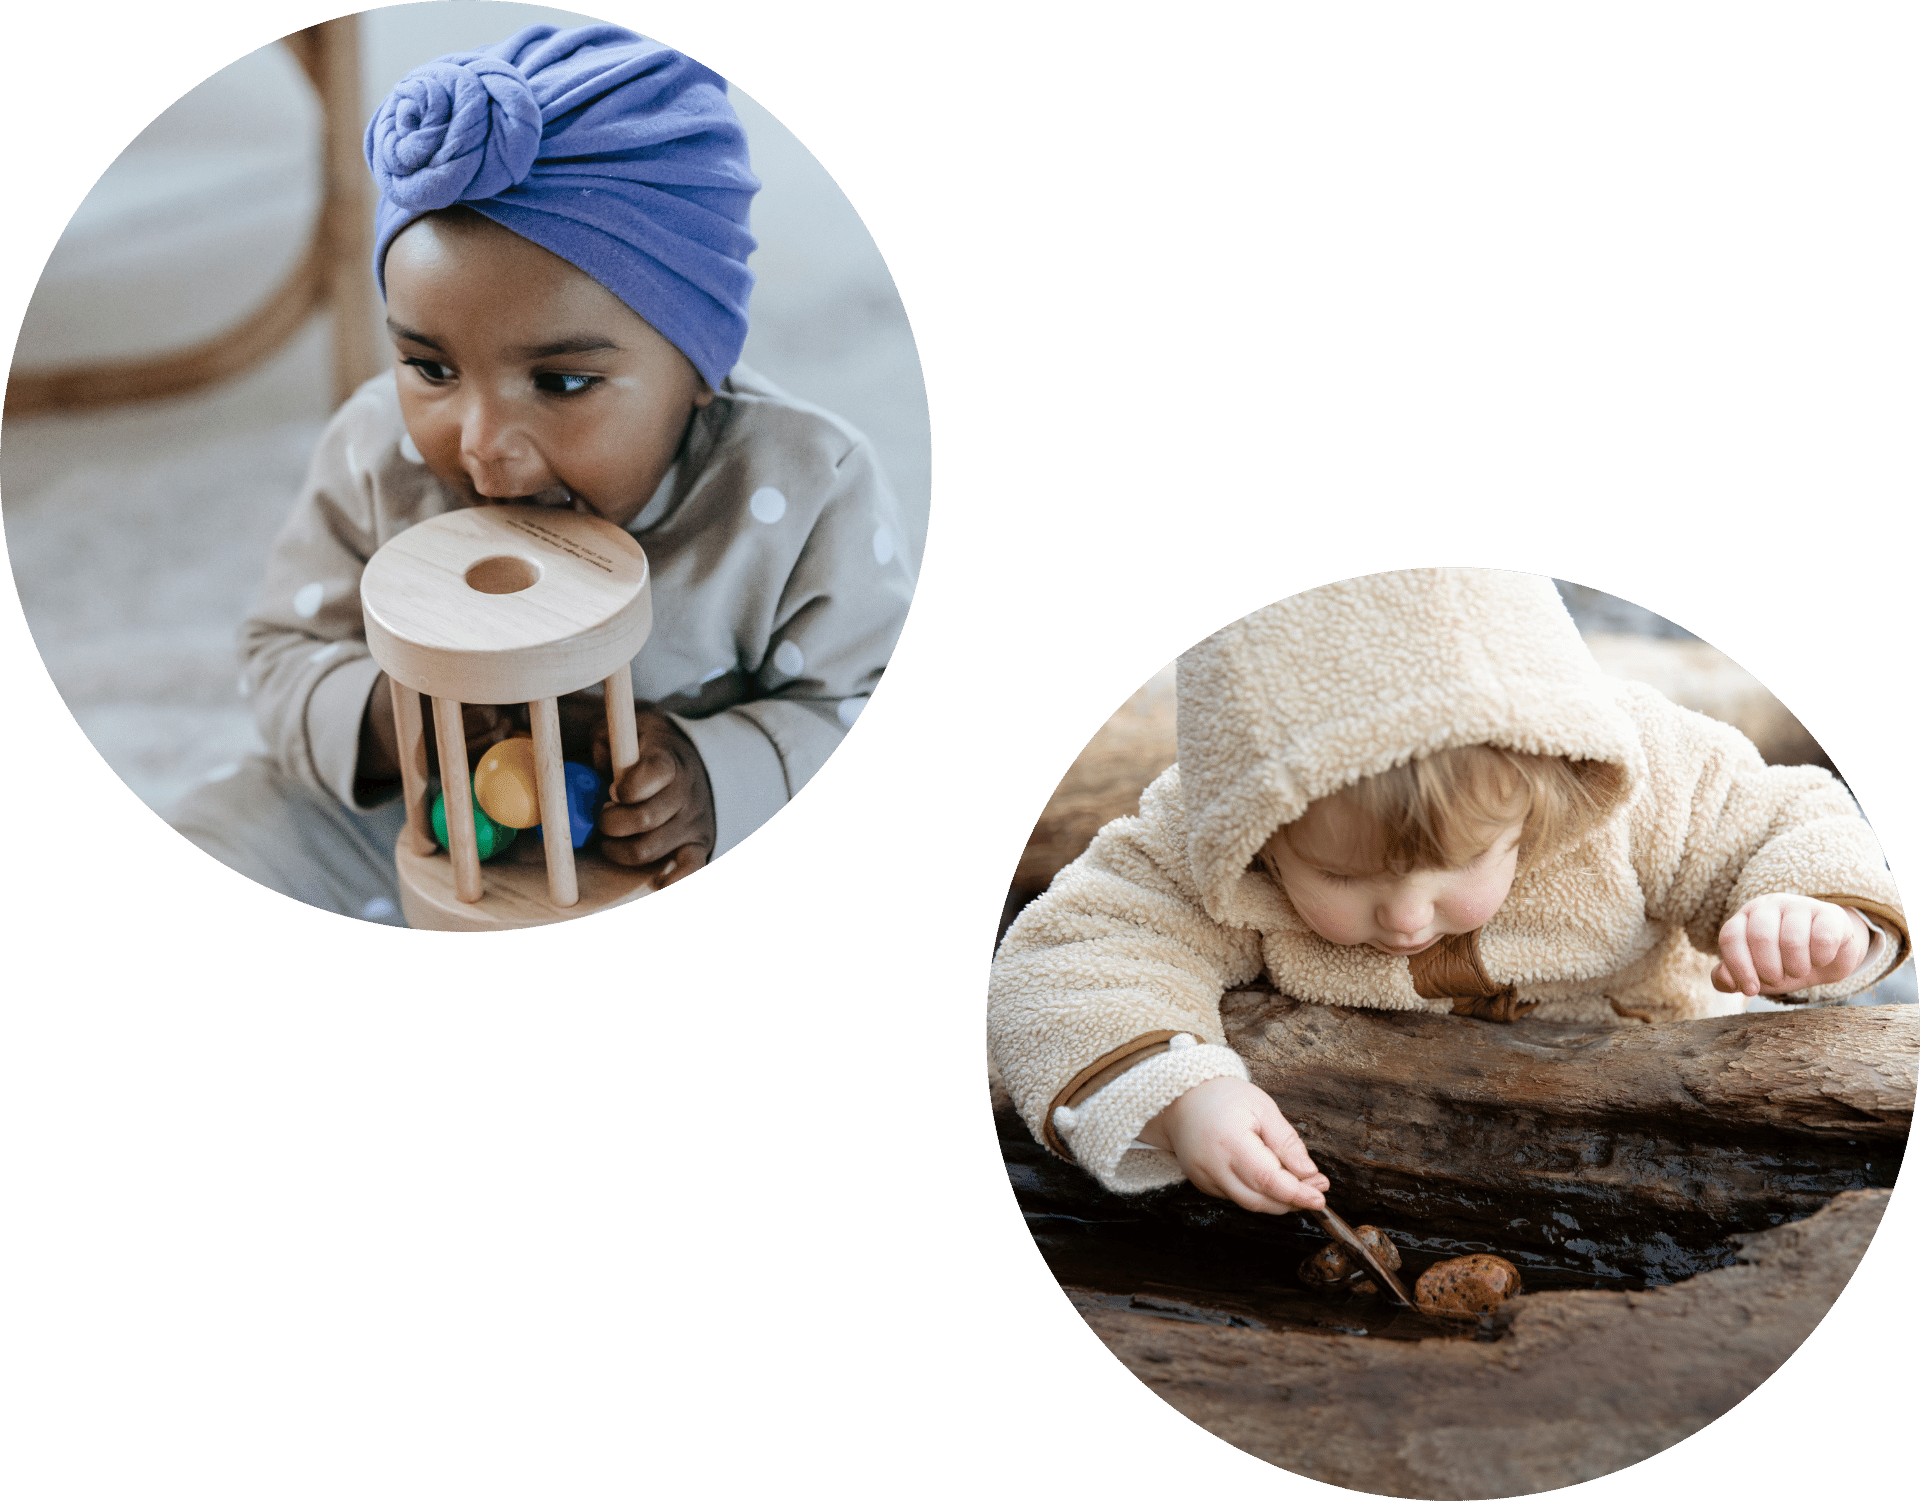 Two circular photos show a little girl playing wearing a blue bandana indoors with a wooden toy and a young girl outdoors examining rocks with a stick.